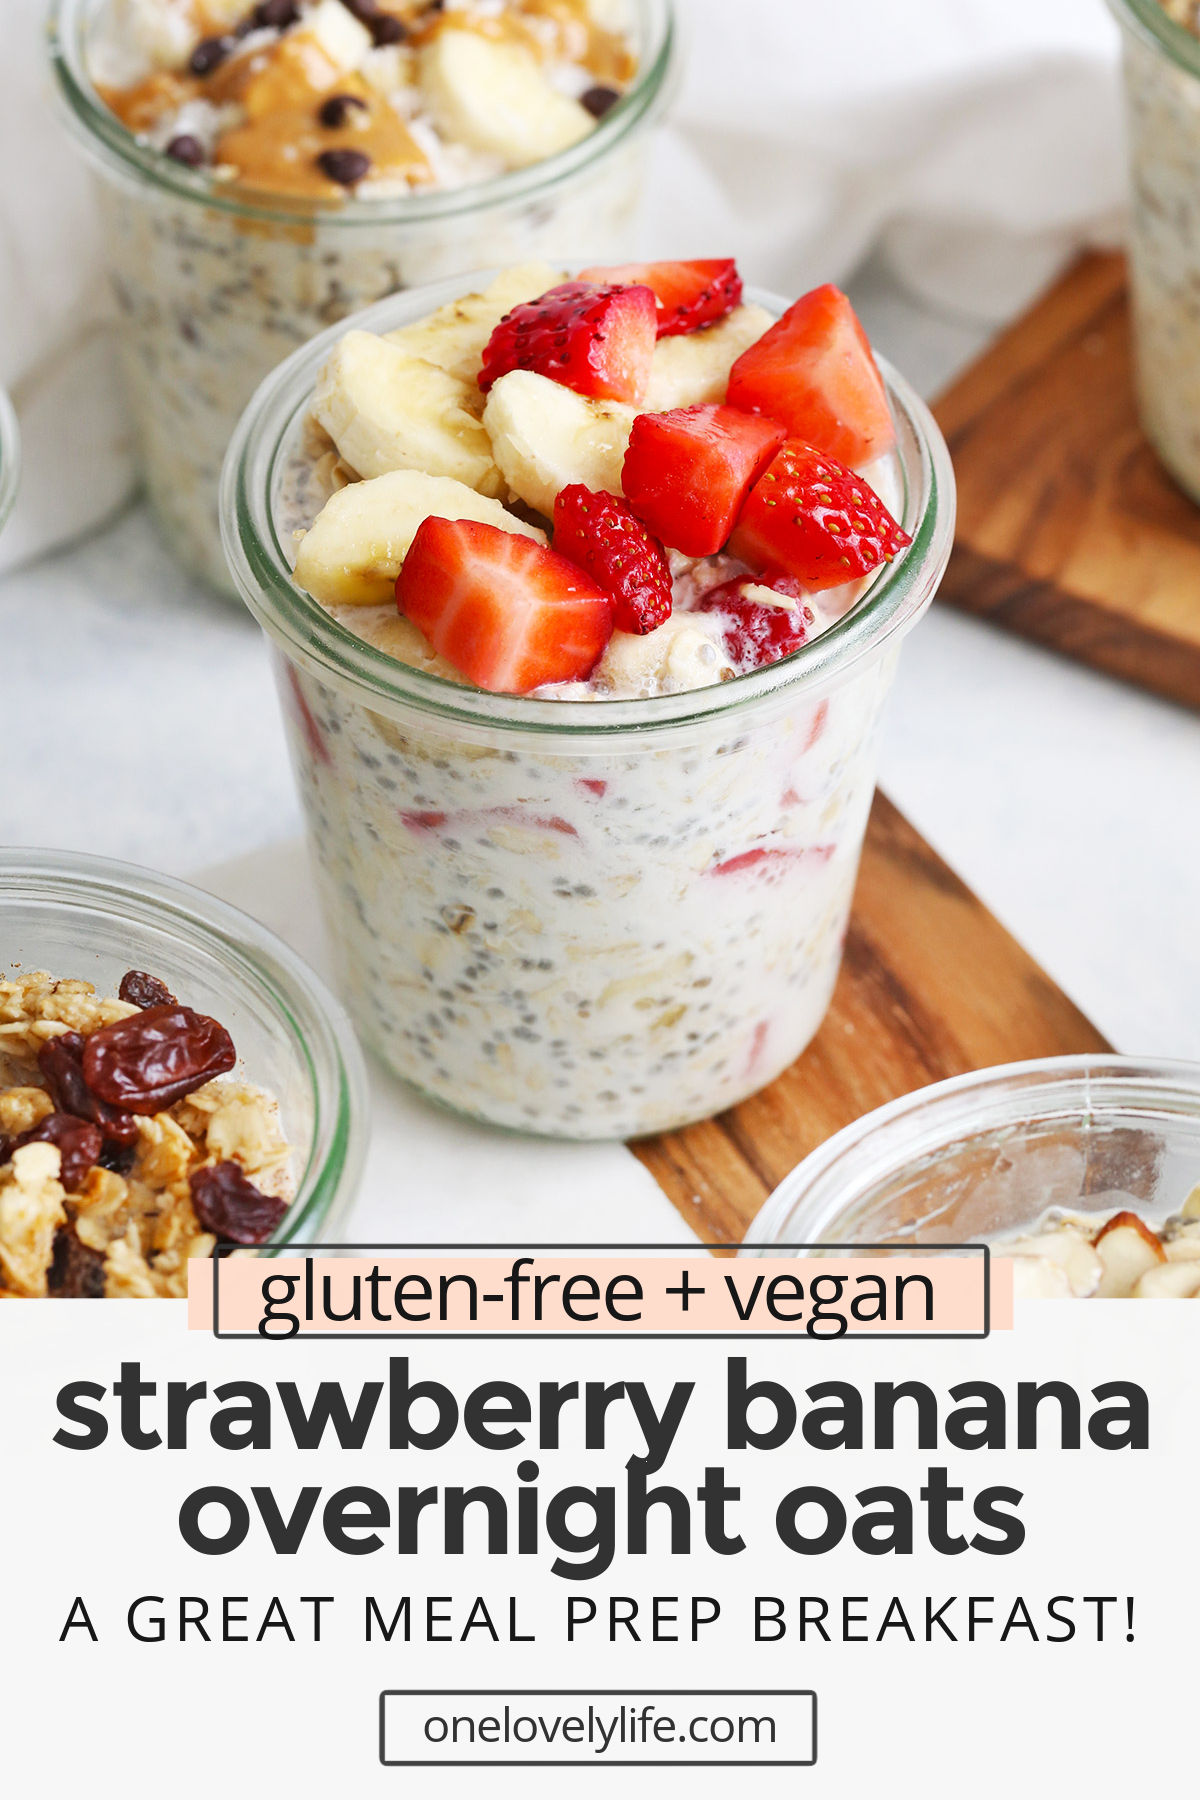 Strawberry Banana Overnight Oats - Creamy overnight oats with bananas and fresh strawberries. This strawberry overnight oats recipe is delicious on a busy morning! (Gluten-free, vegan) // Meal Prep Breakfast // Strawberry Overnight Oats // Healthy Breakfast / strawberry overnight oats recipe / healthy breakfast ideas / gluten free breakfast / vegan breakfast / strawberry overnight oatmeal